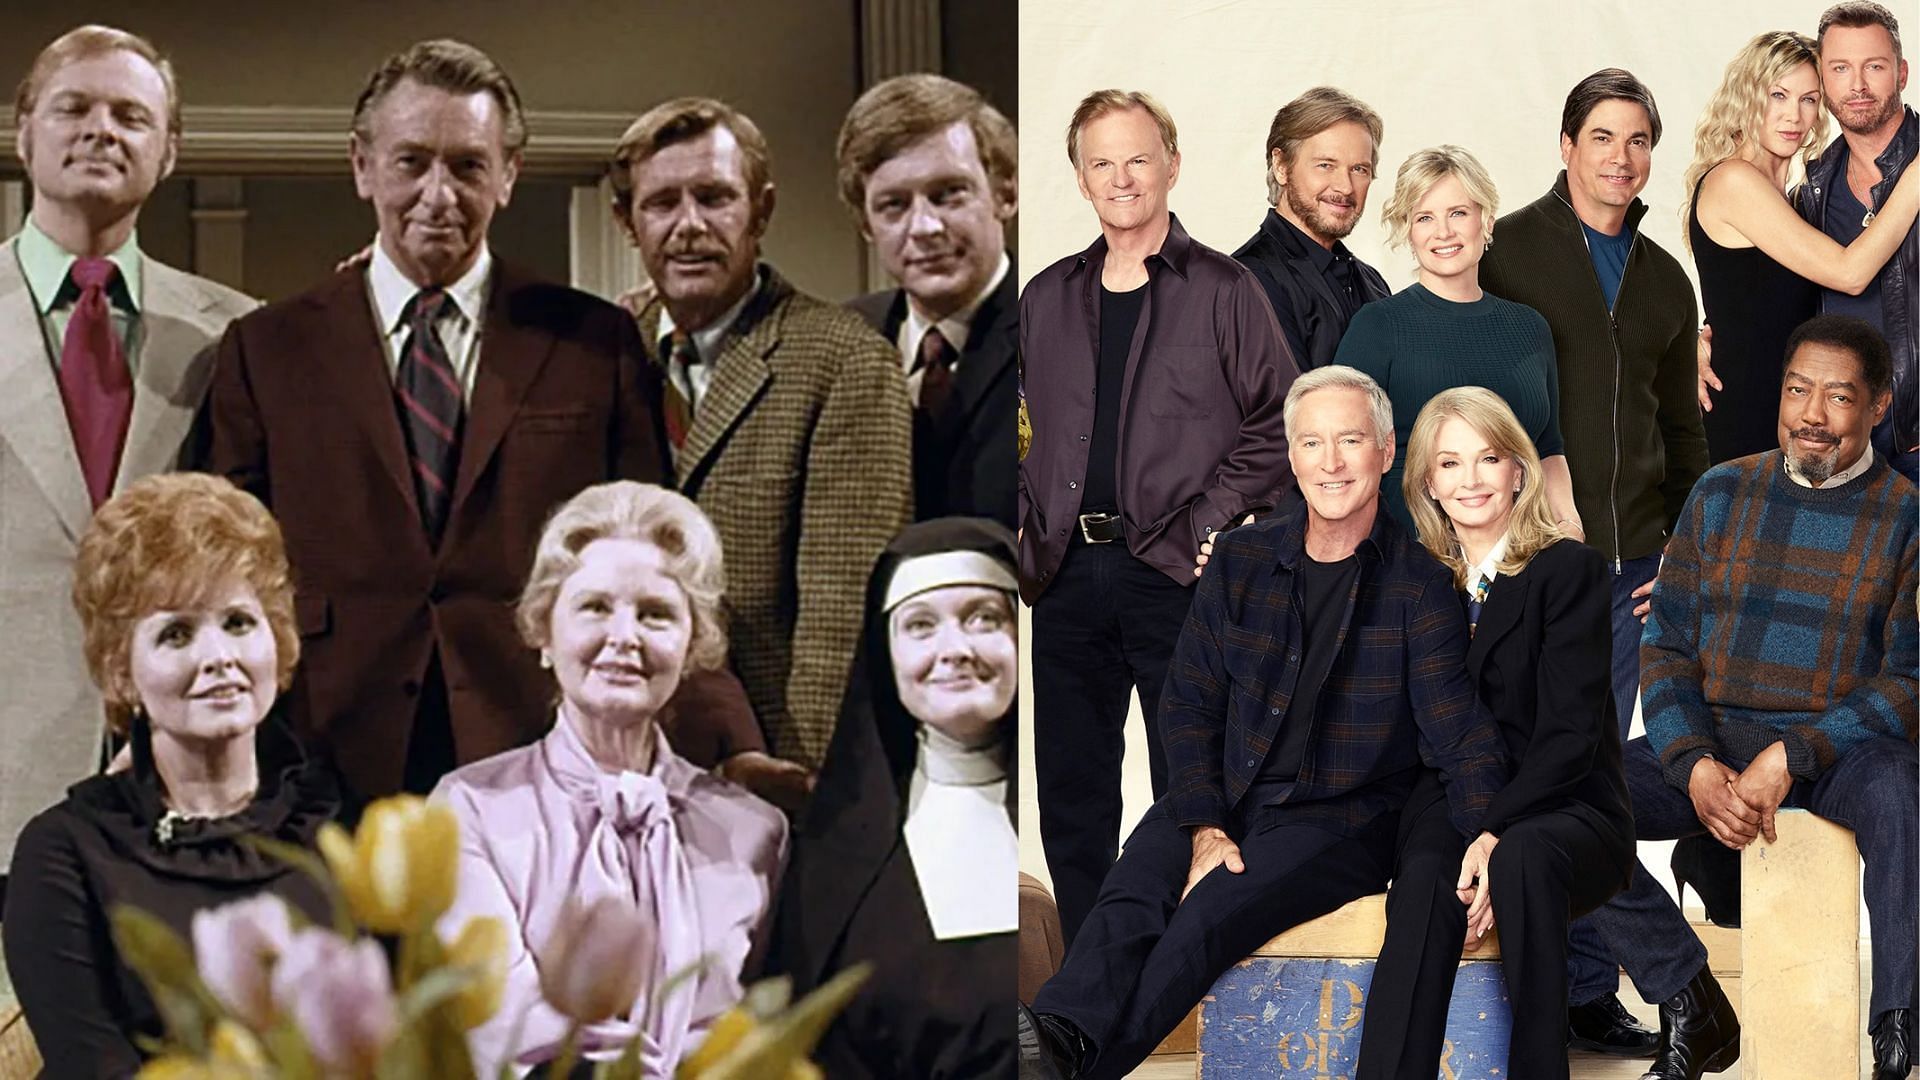 Days of Our Lives premiered in 1965 (Image via NBC/Peacock)